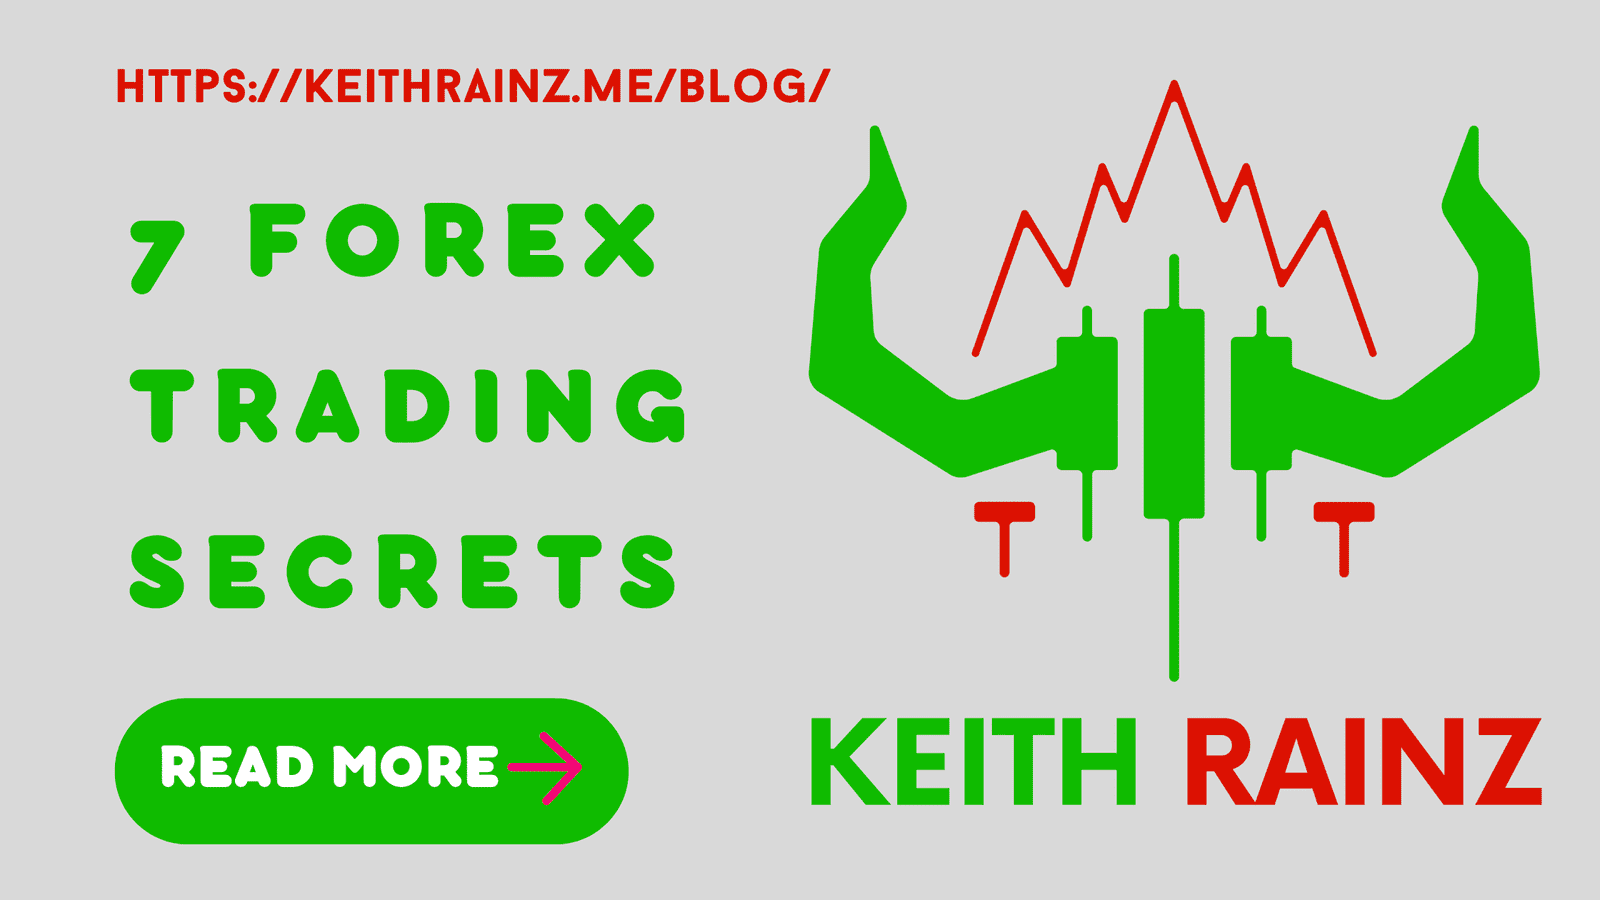 7 Forex trading secrets you should know in 2022